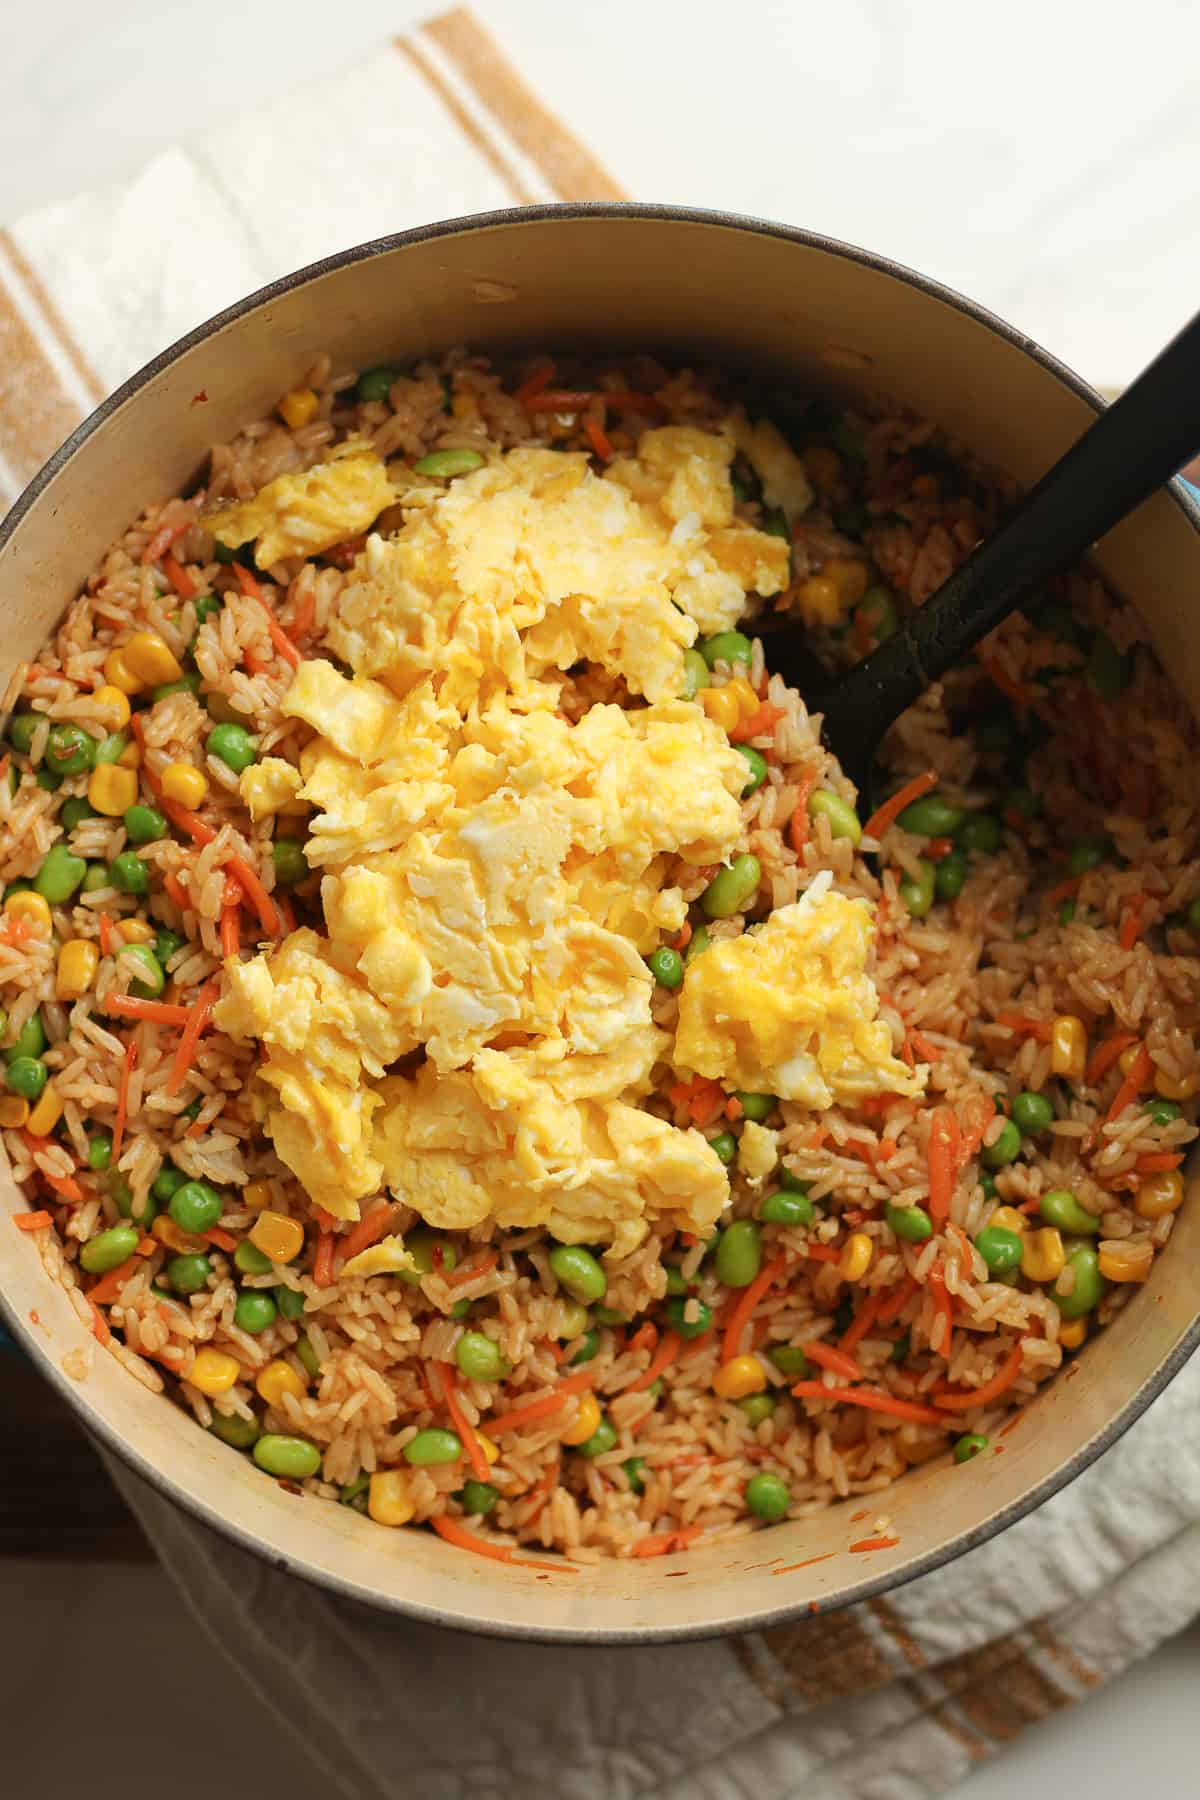 A stock pot of the fried rice plus eggs on top.